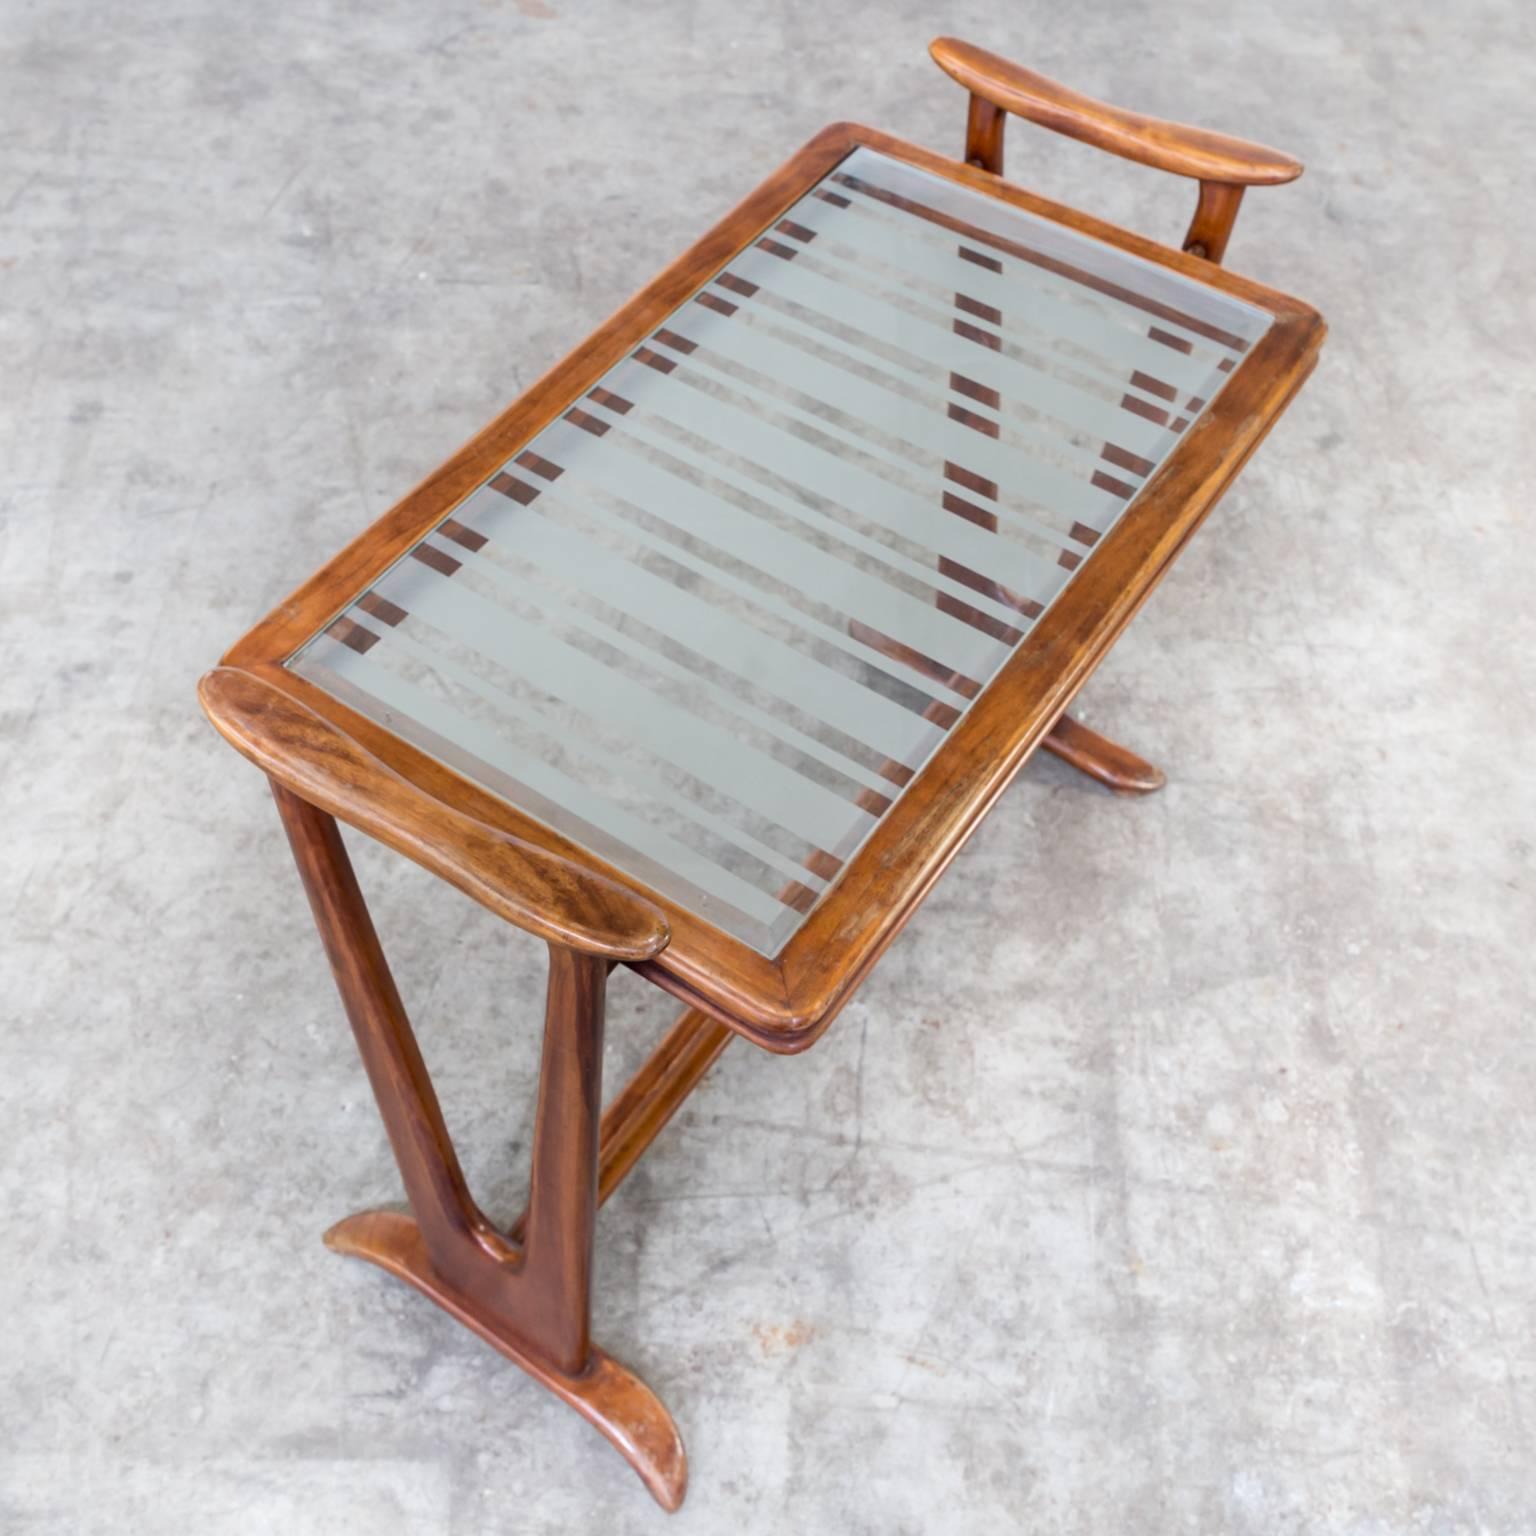 1950s rosewood side table glass tabletop in the style of Gio Ponti. Good condition, wear consistant with age and use. Beautiful half frosted glass. Dimensions: 71cm (W) x 35cm (D) x 60cm (H).